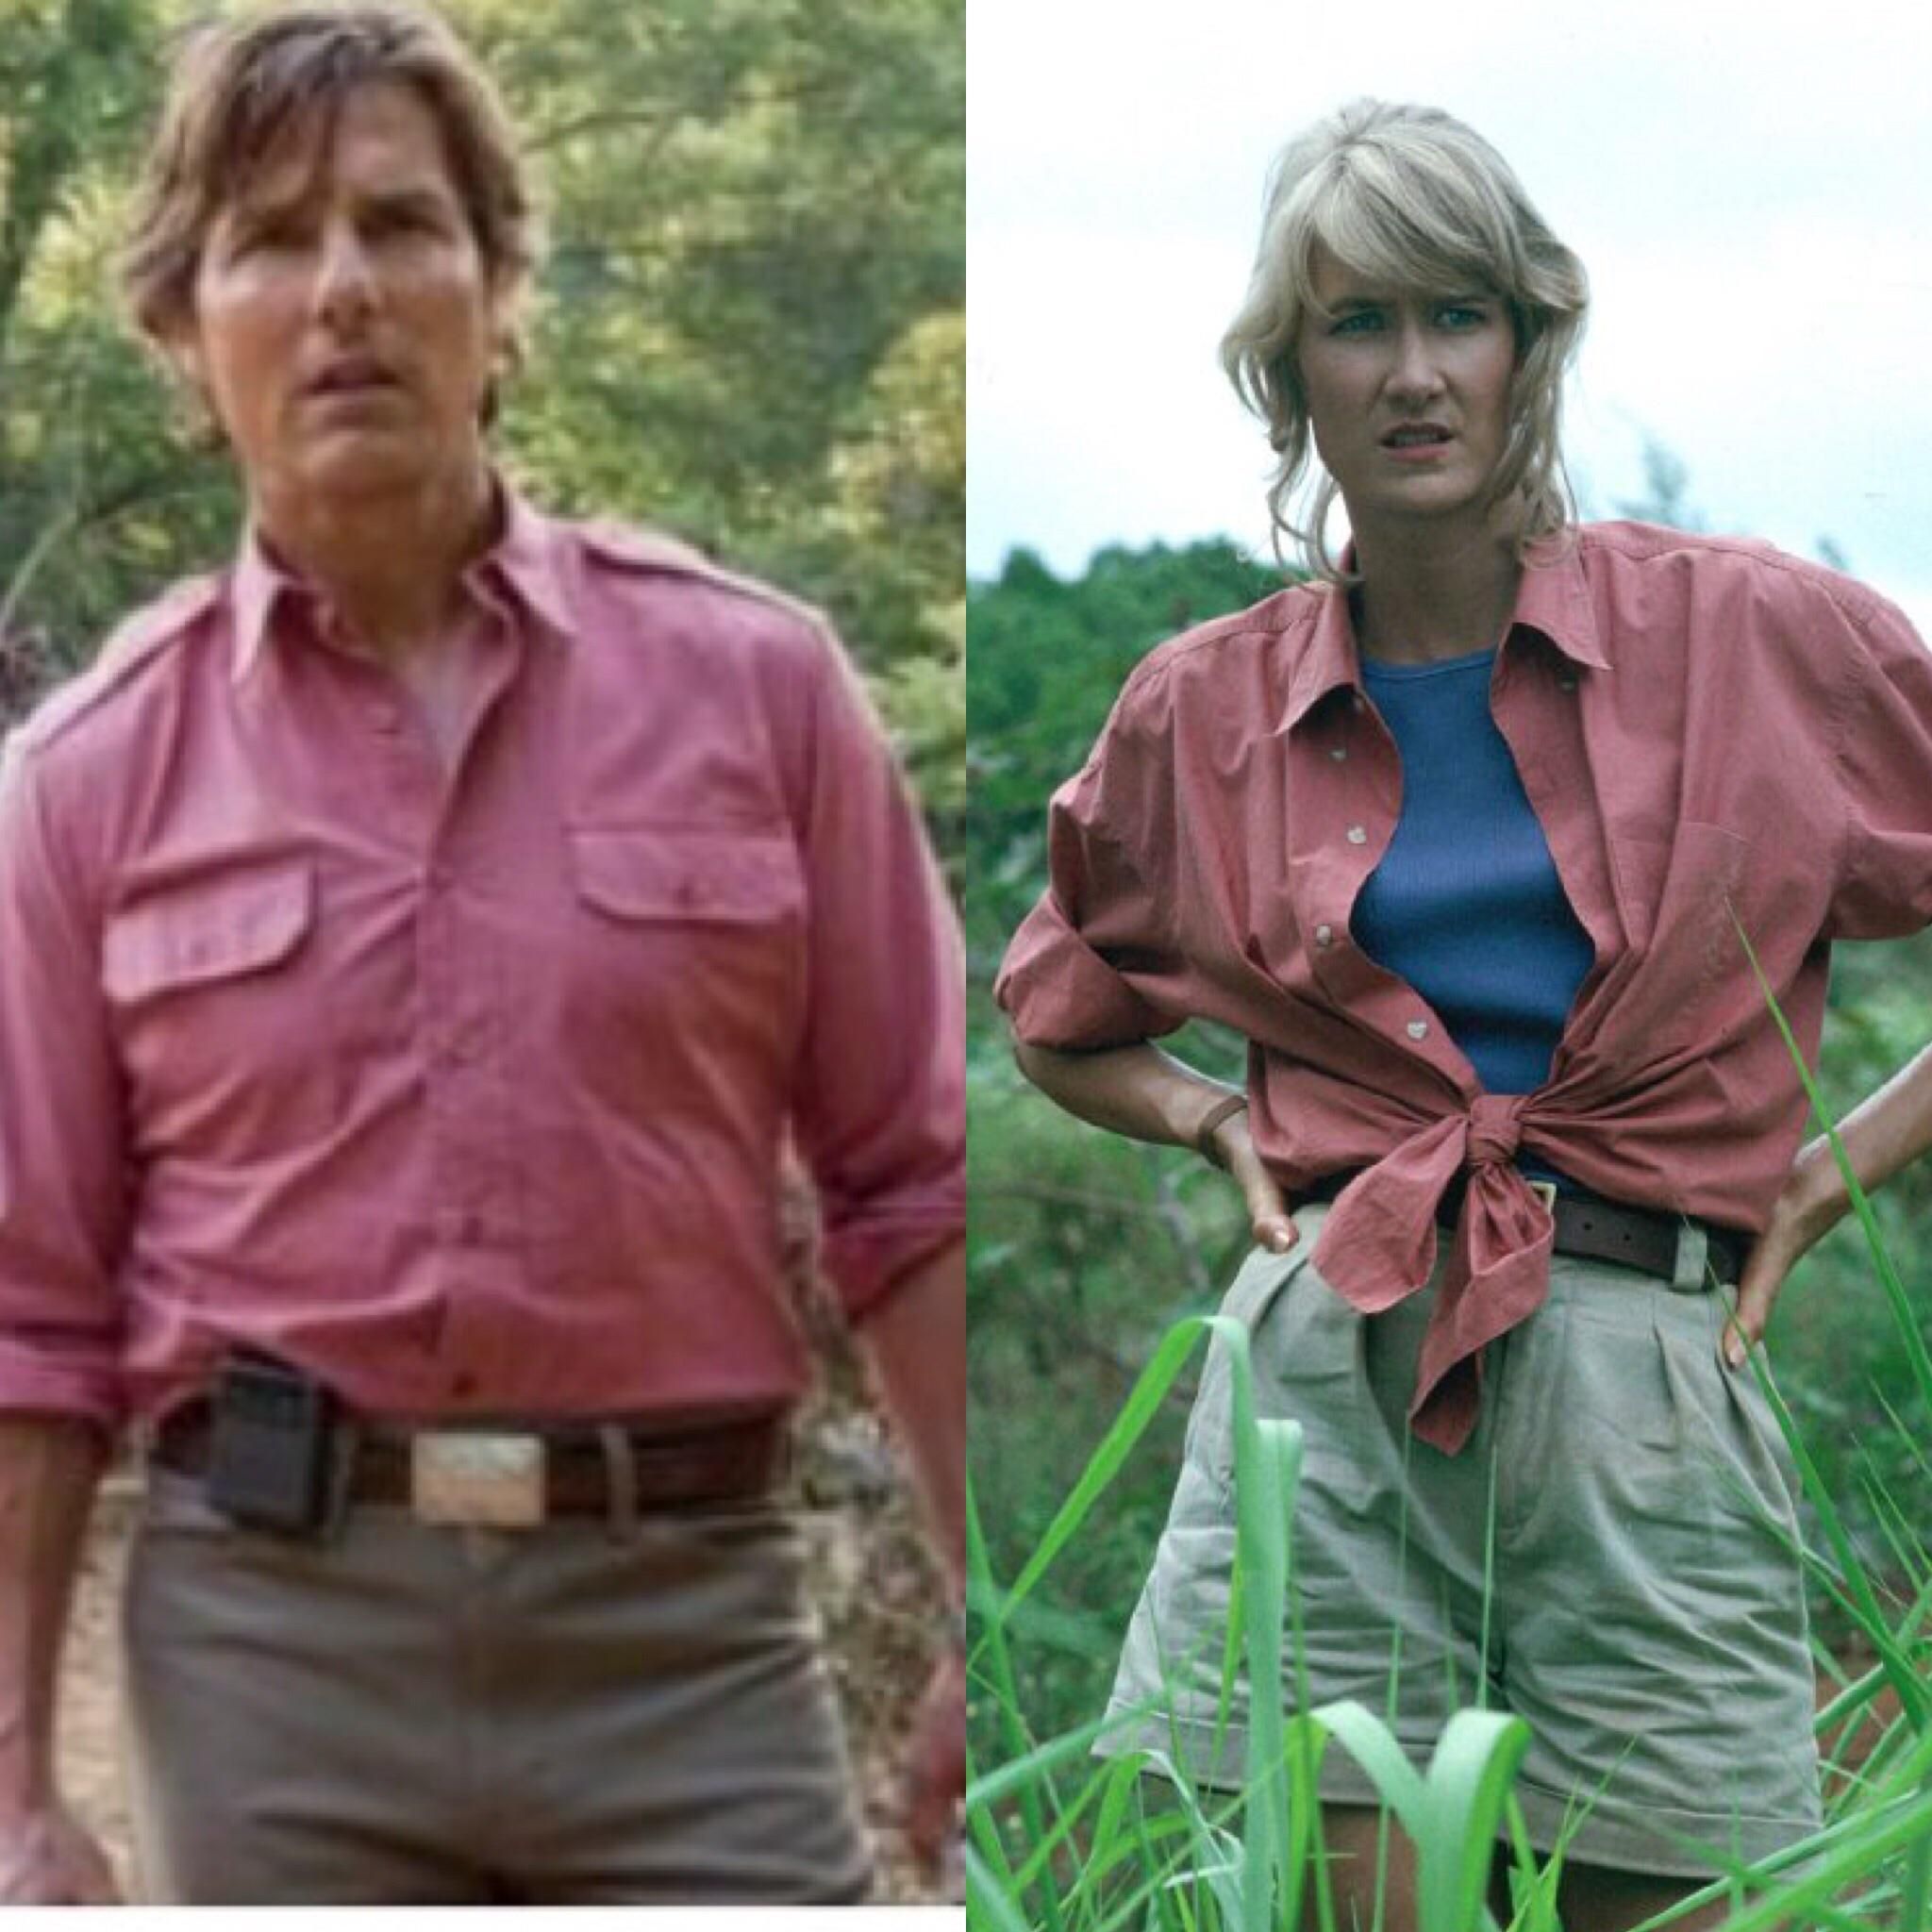 Real talk... Tom Cruise kind of looks like Dern from Jurassic Park